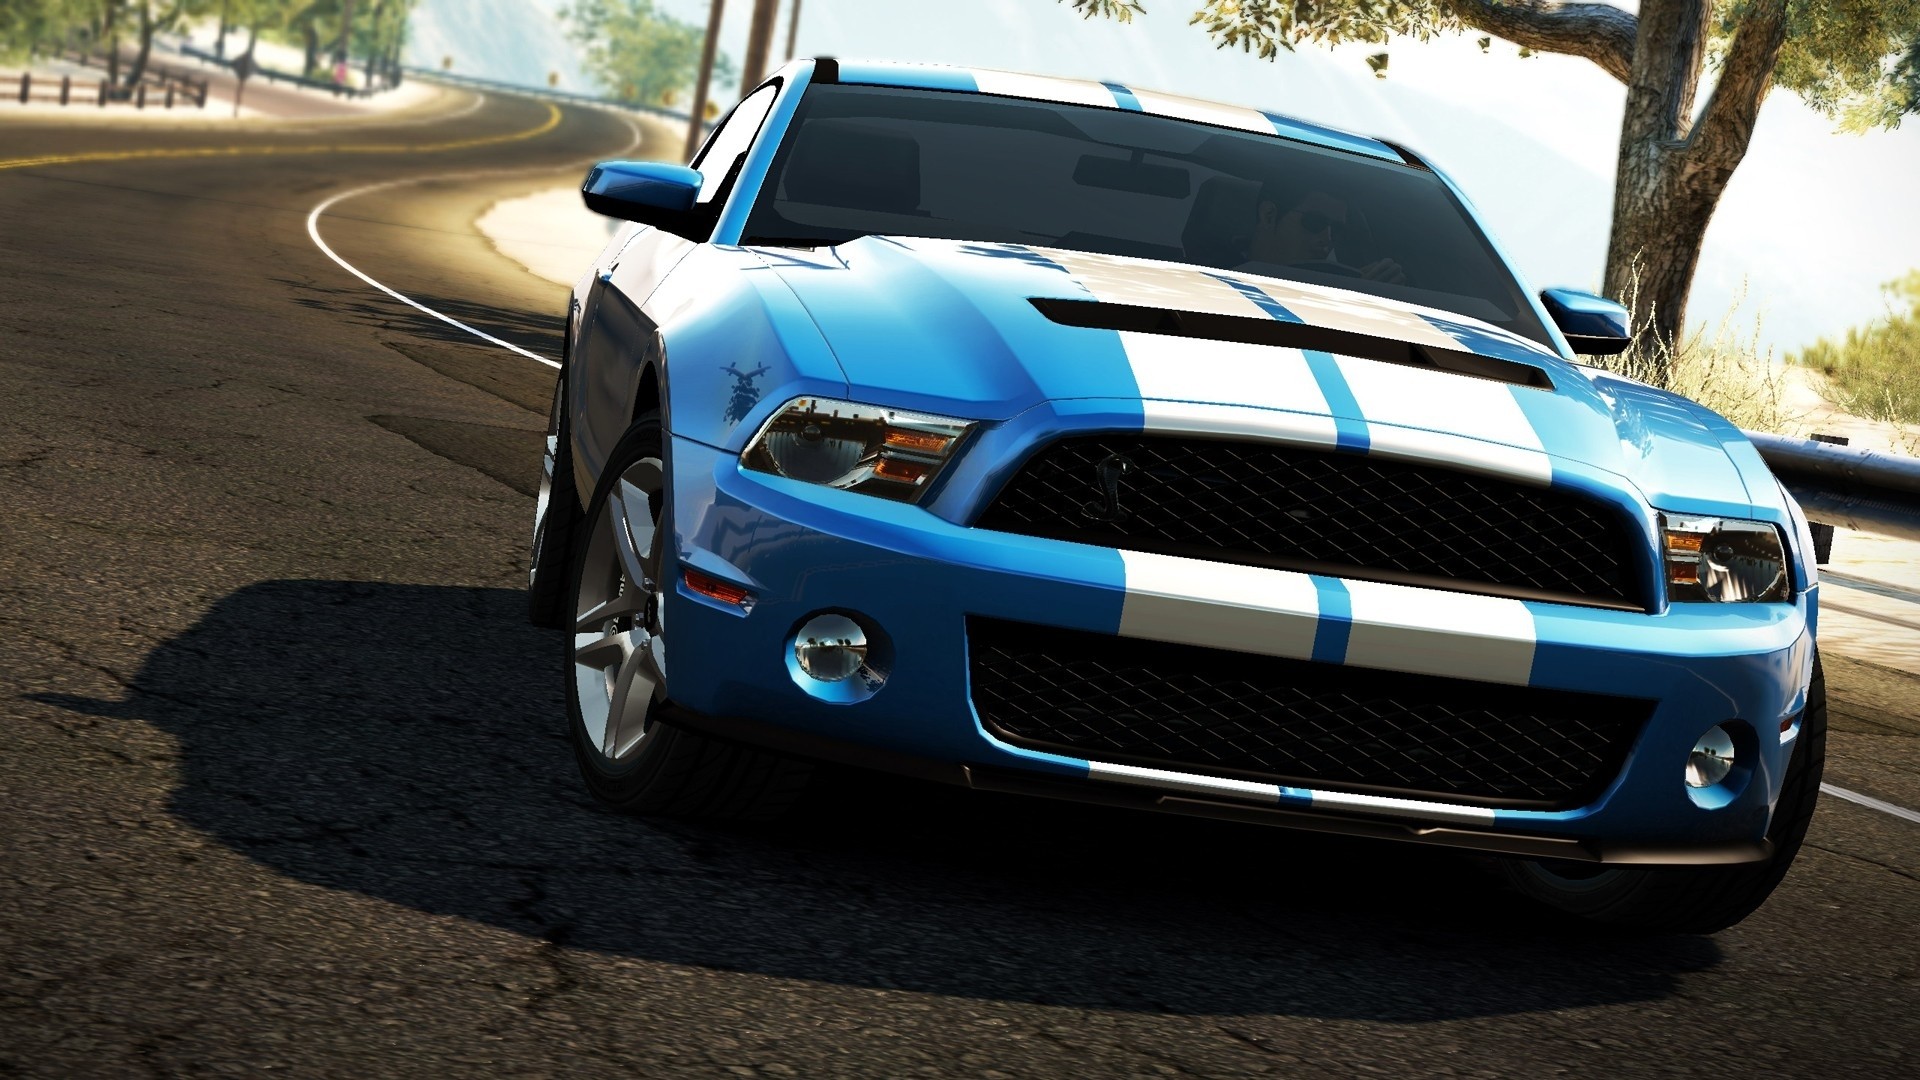 The blue Shelby mustang from the game